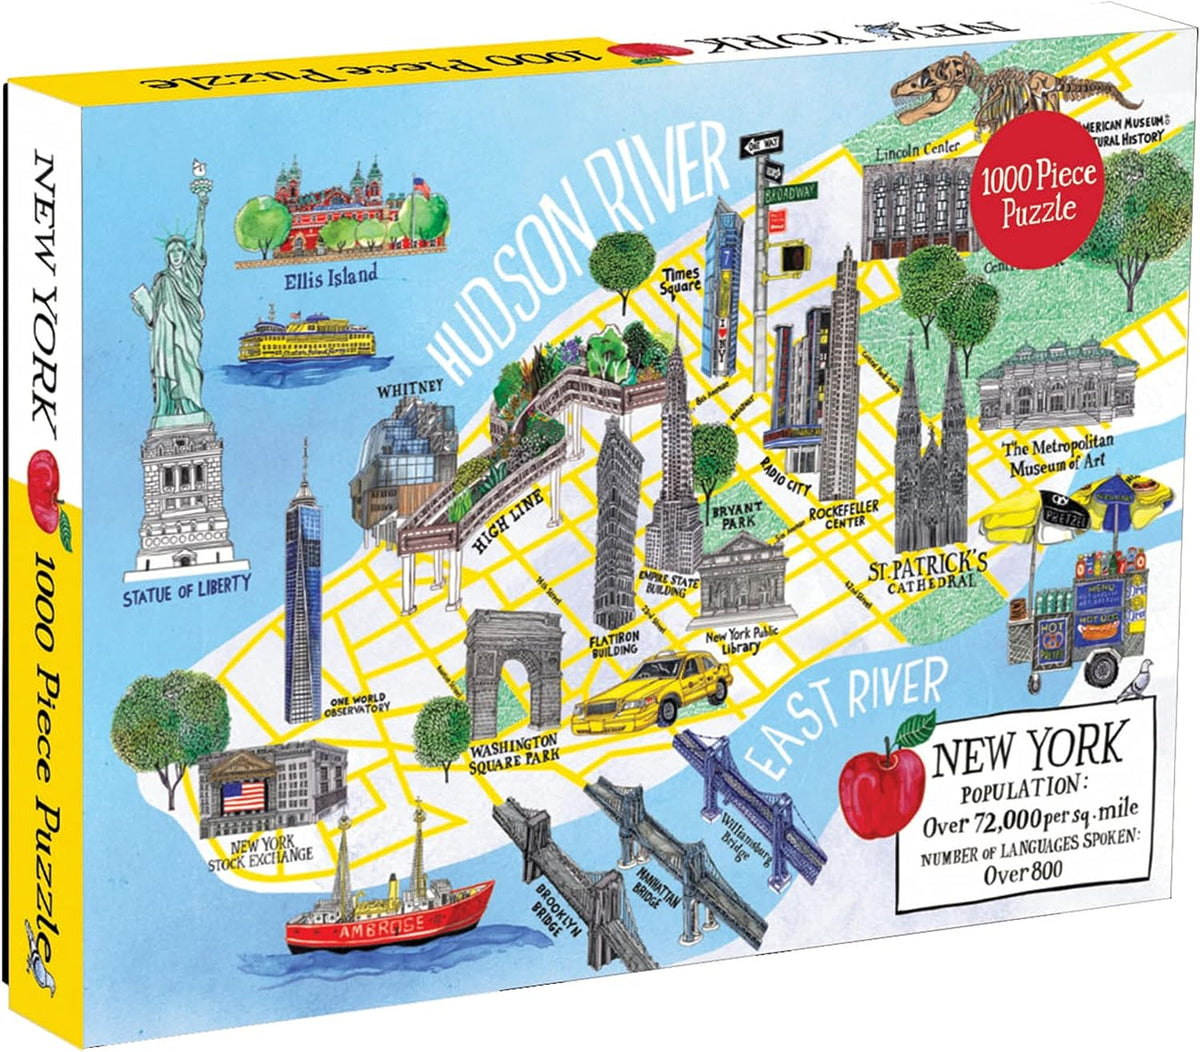 New York Map 1000 pc Puzzle 9780735354265